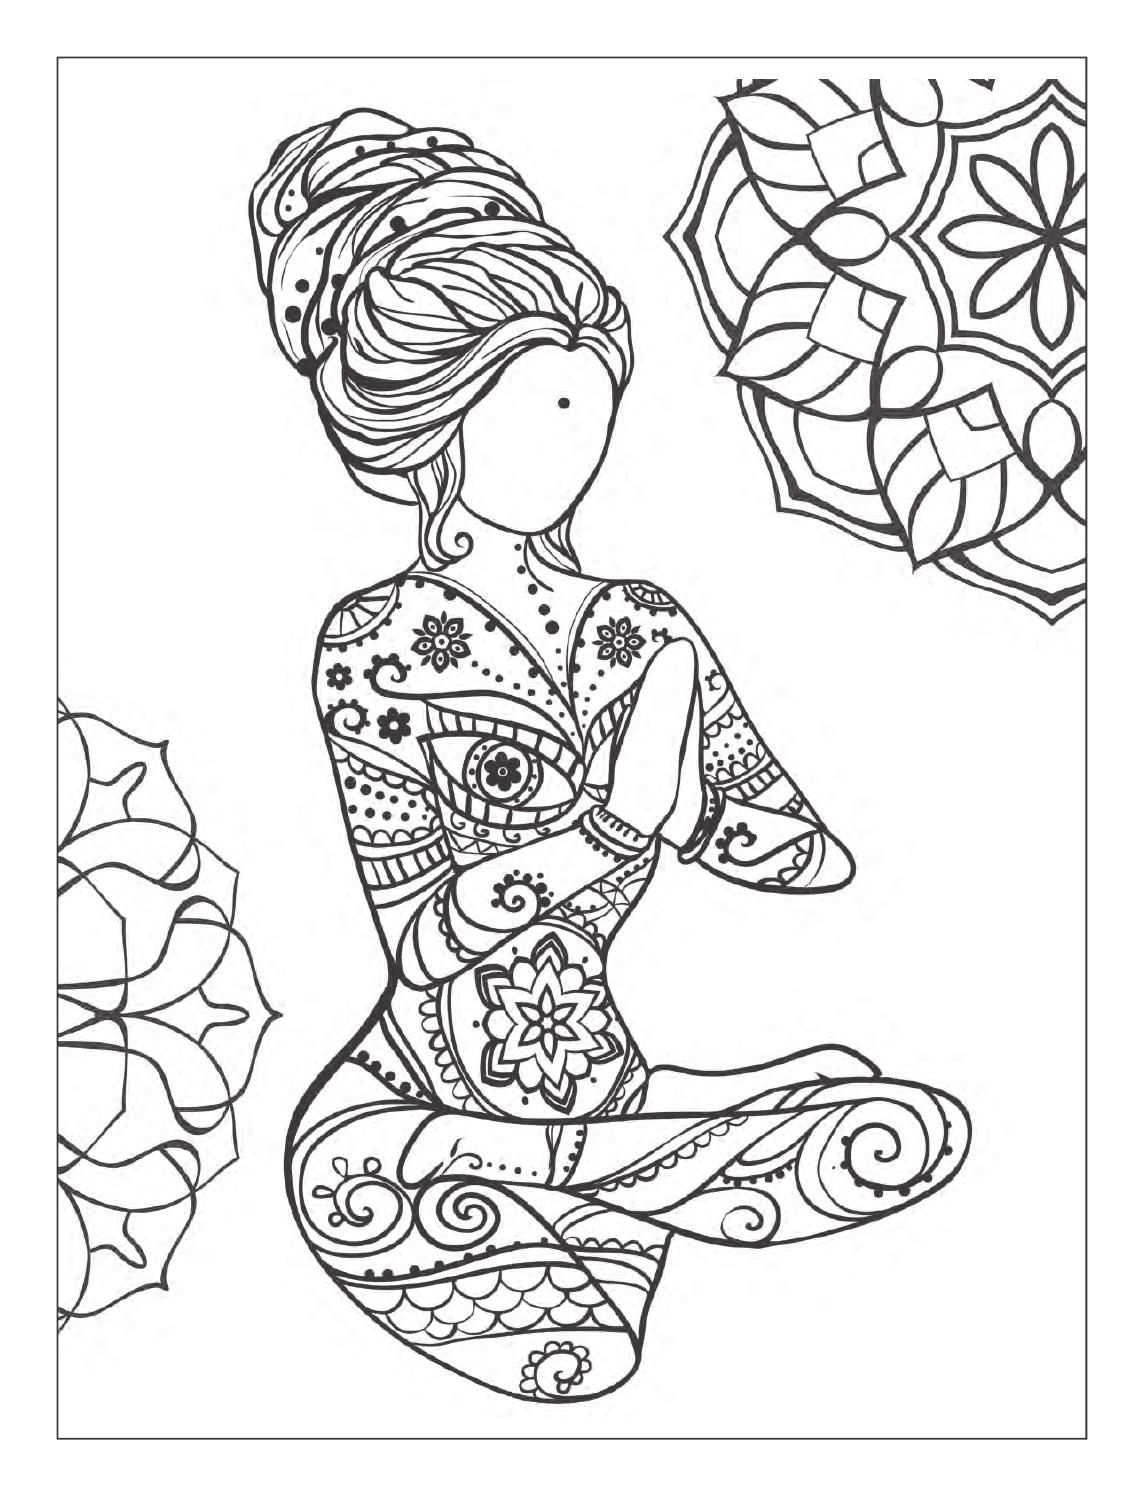 Yoga And Meditation Coloring Book For Adults With Yoga Poses And